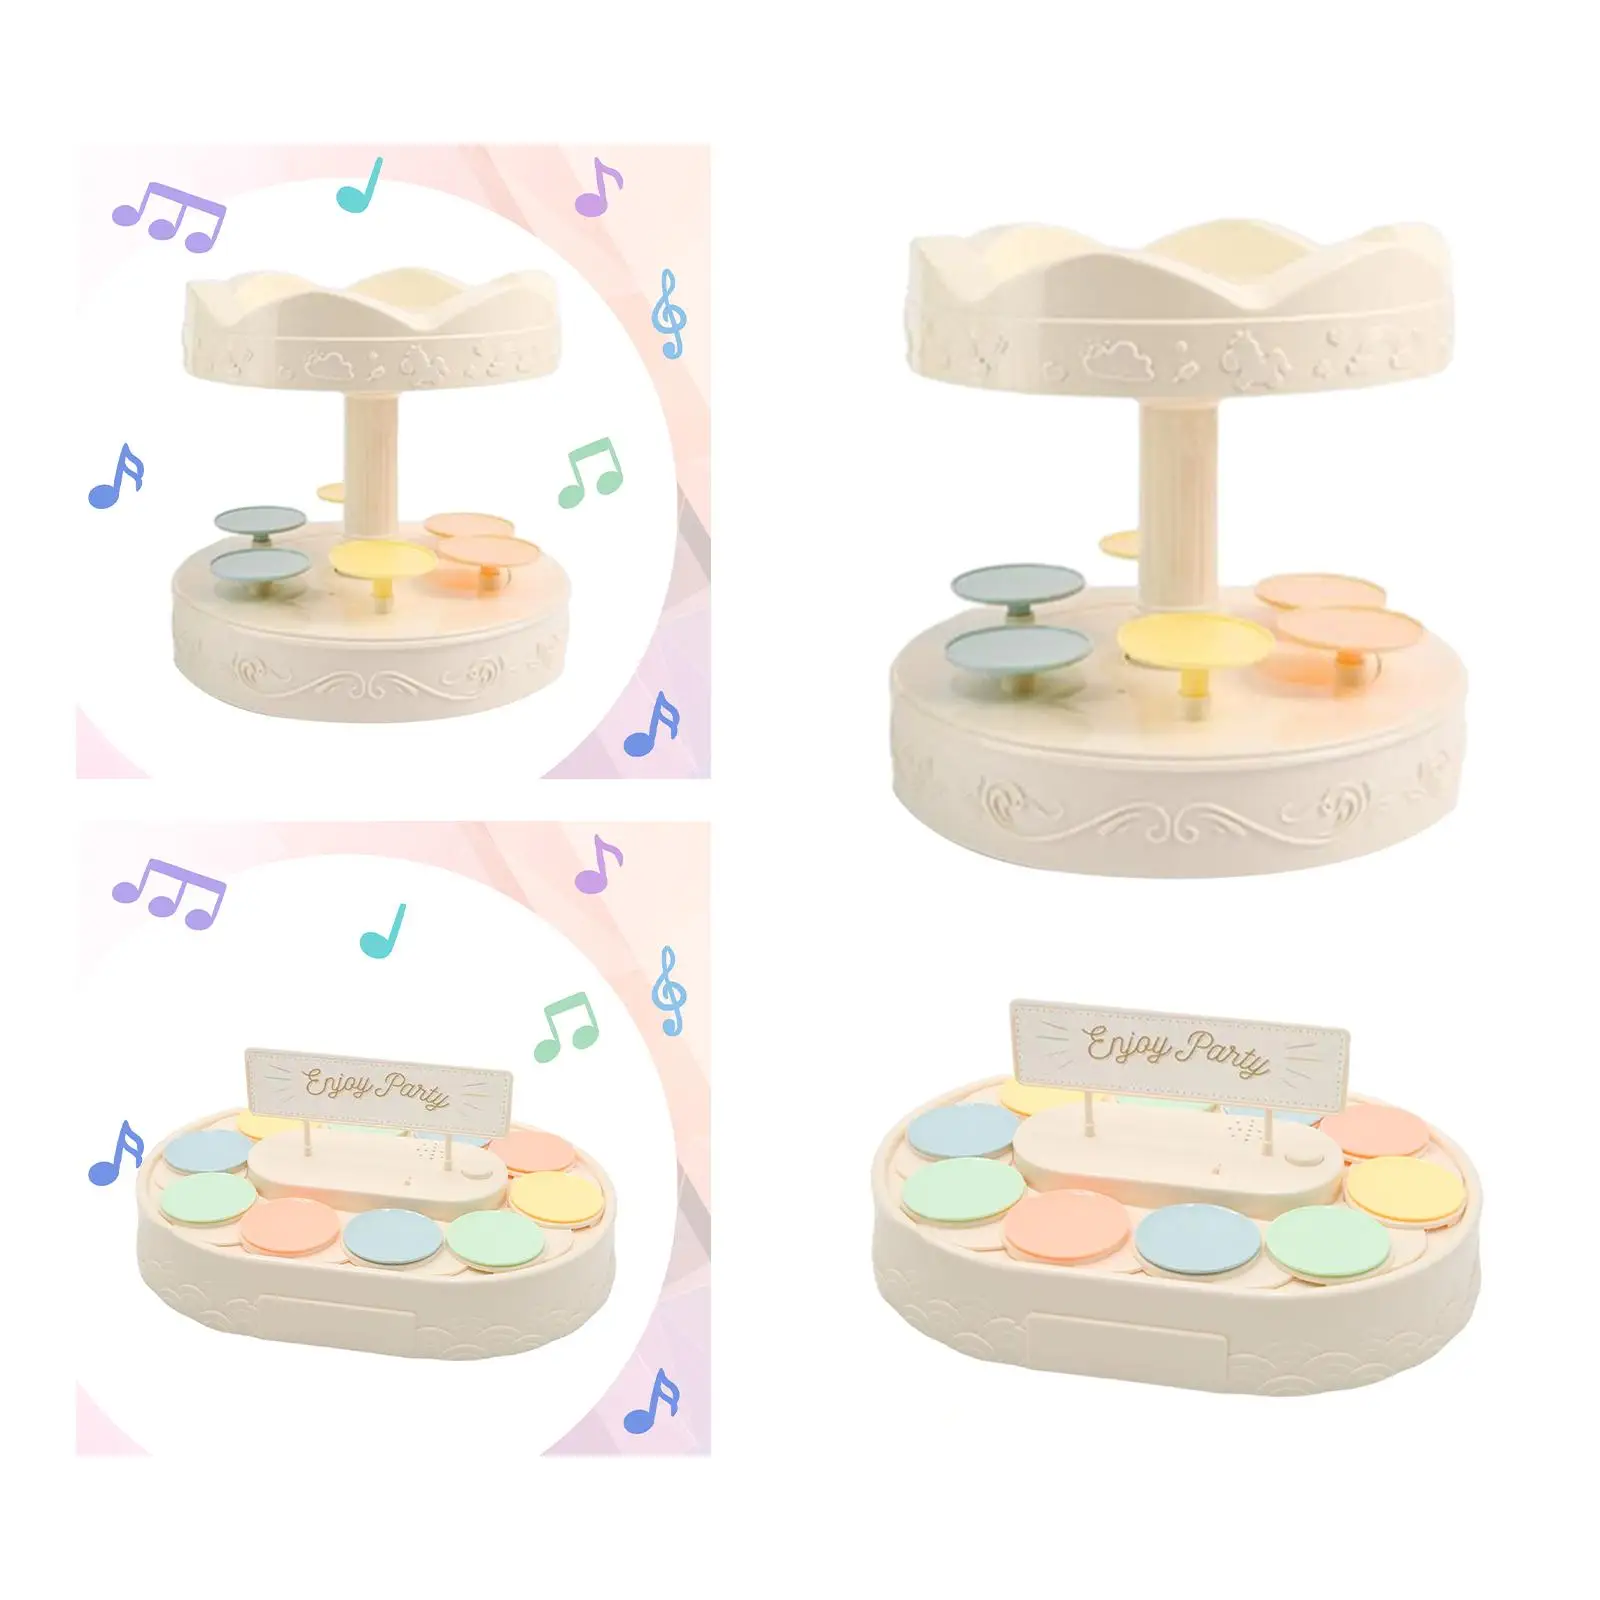 Carousel Cupcake Holder Cookie Cupcake Holder Automatic Rotating Turntable